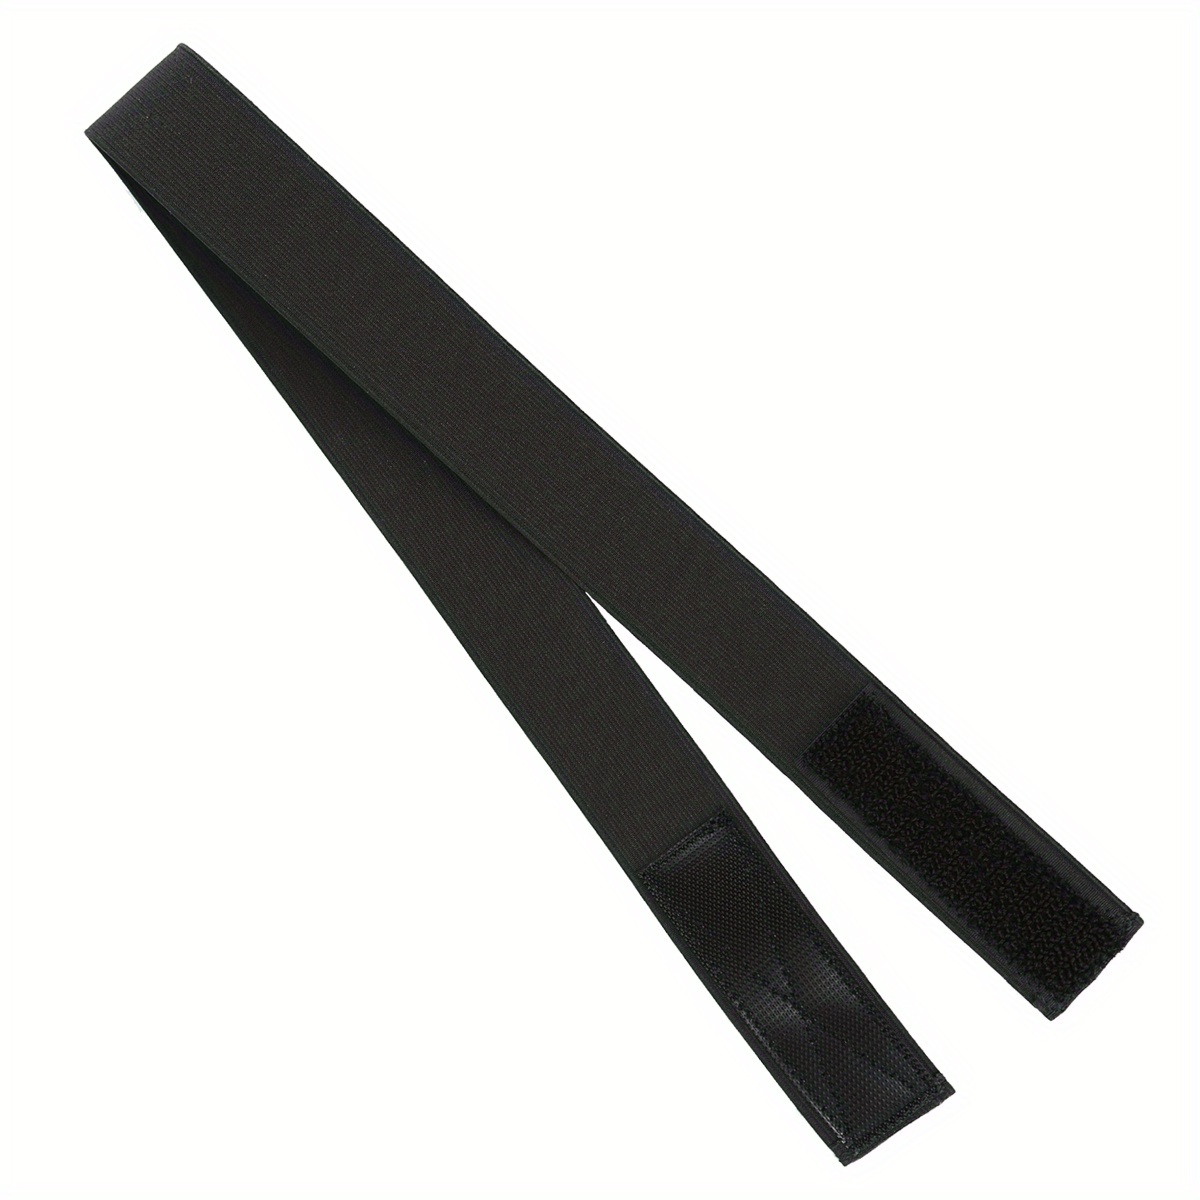 JSYPWEIJIE 5 Pcs Elastic Melt Band for Wig Black Nylon Edges Bands Wig Melt Band for Edges with Velcro for Laying Edges Women Forehead Lace Closure